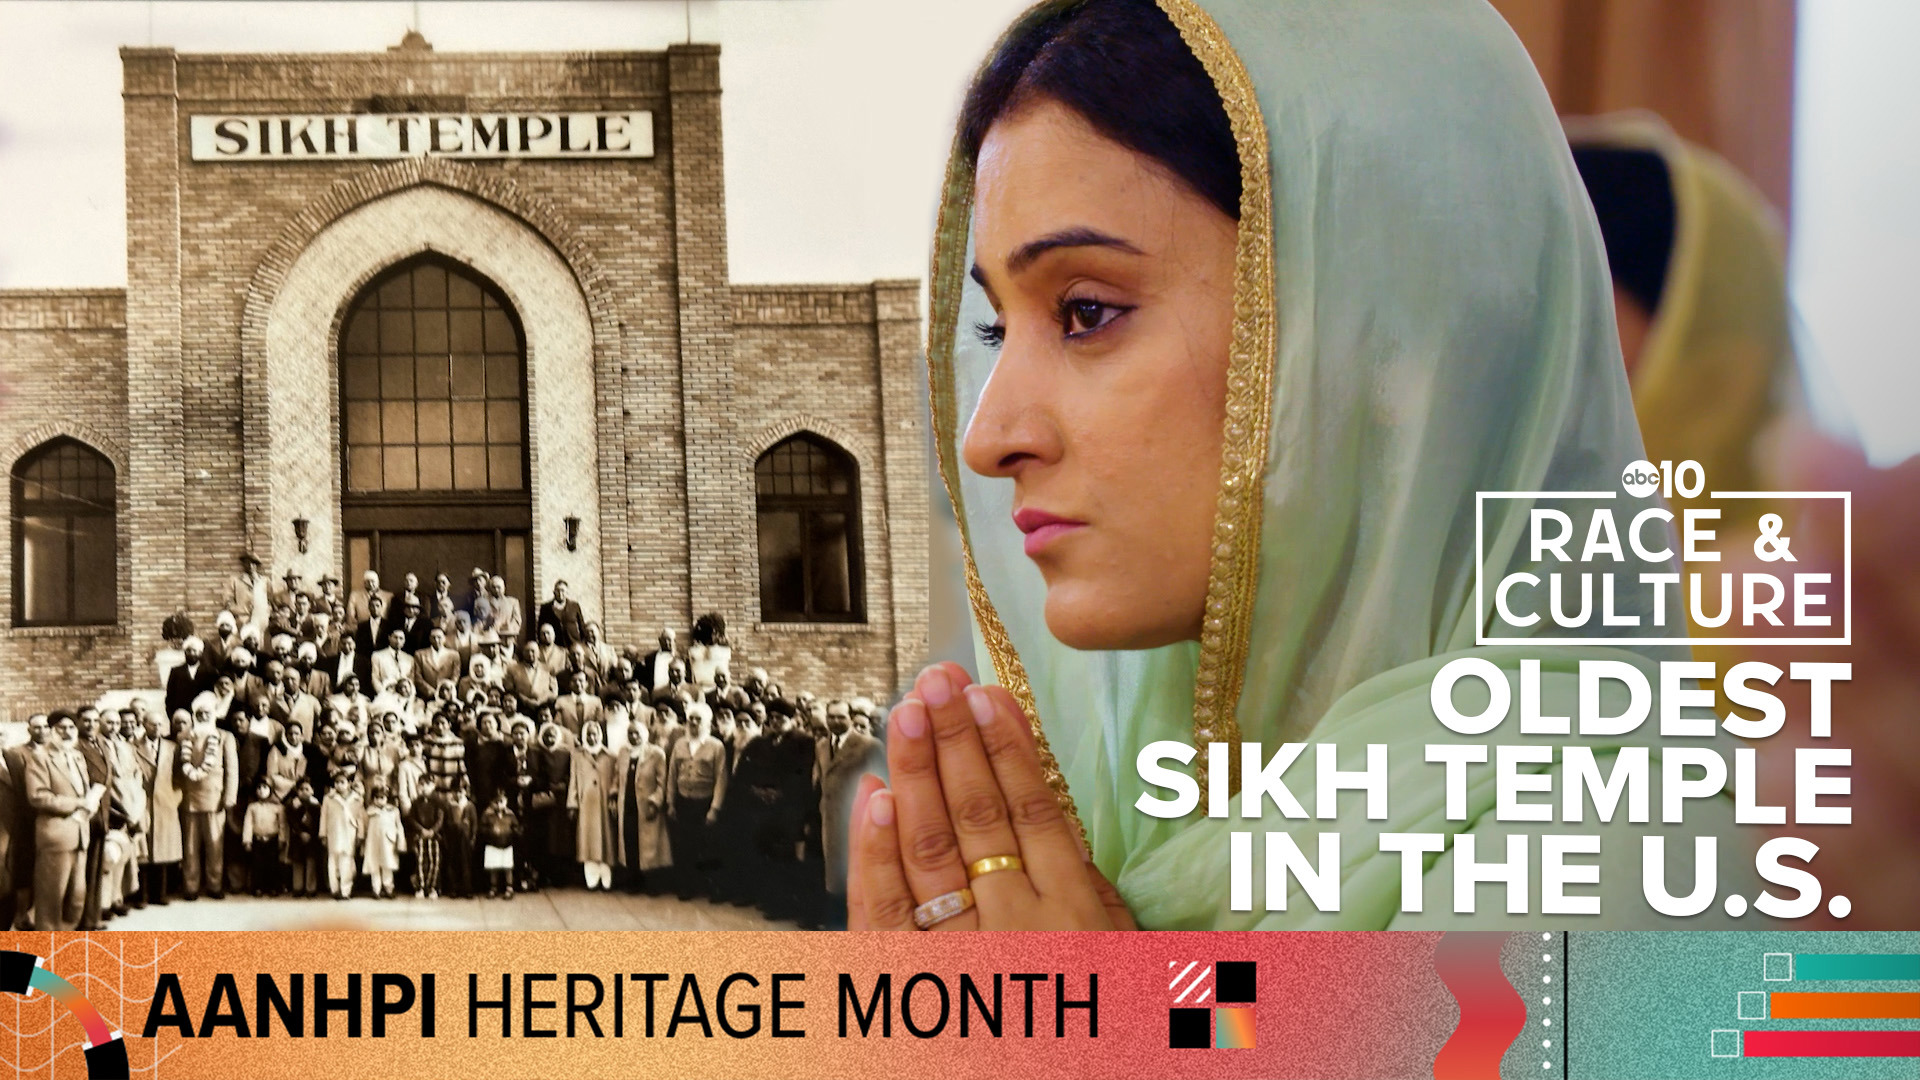 The nation's first Sikh temple played a crucial part in ending British rule over India.